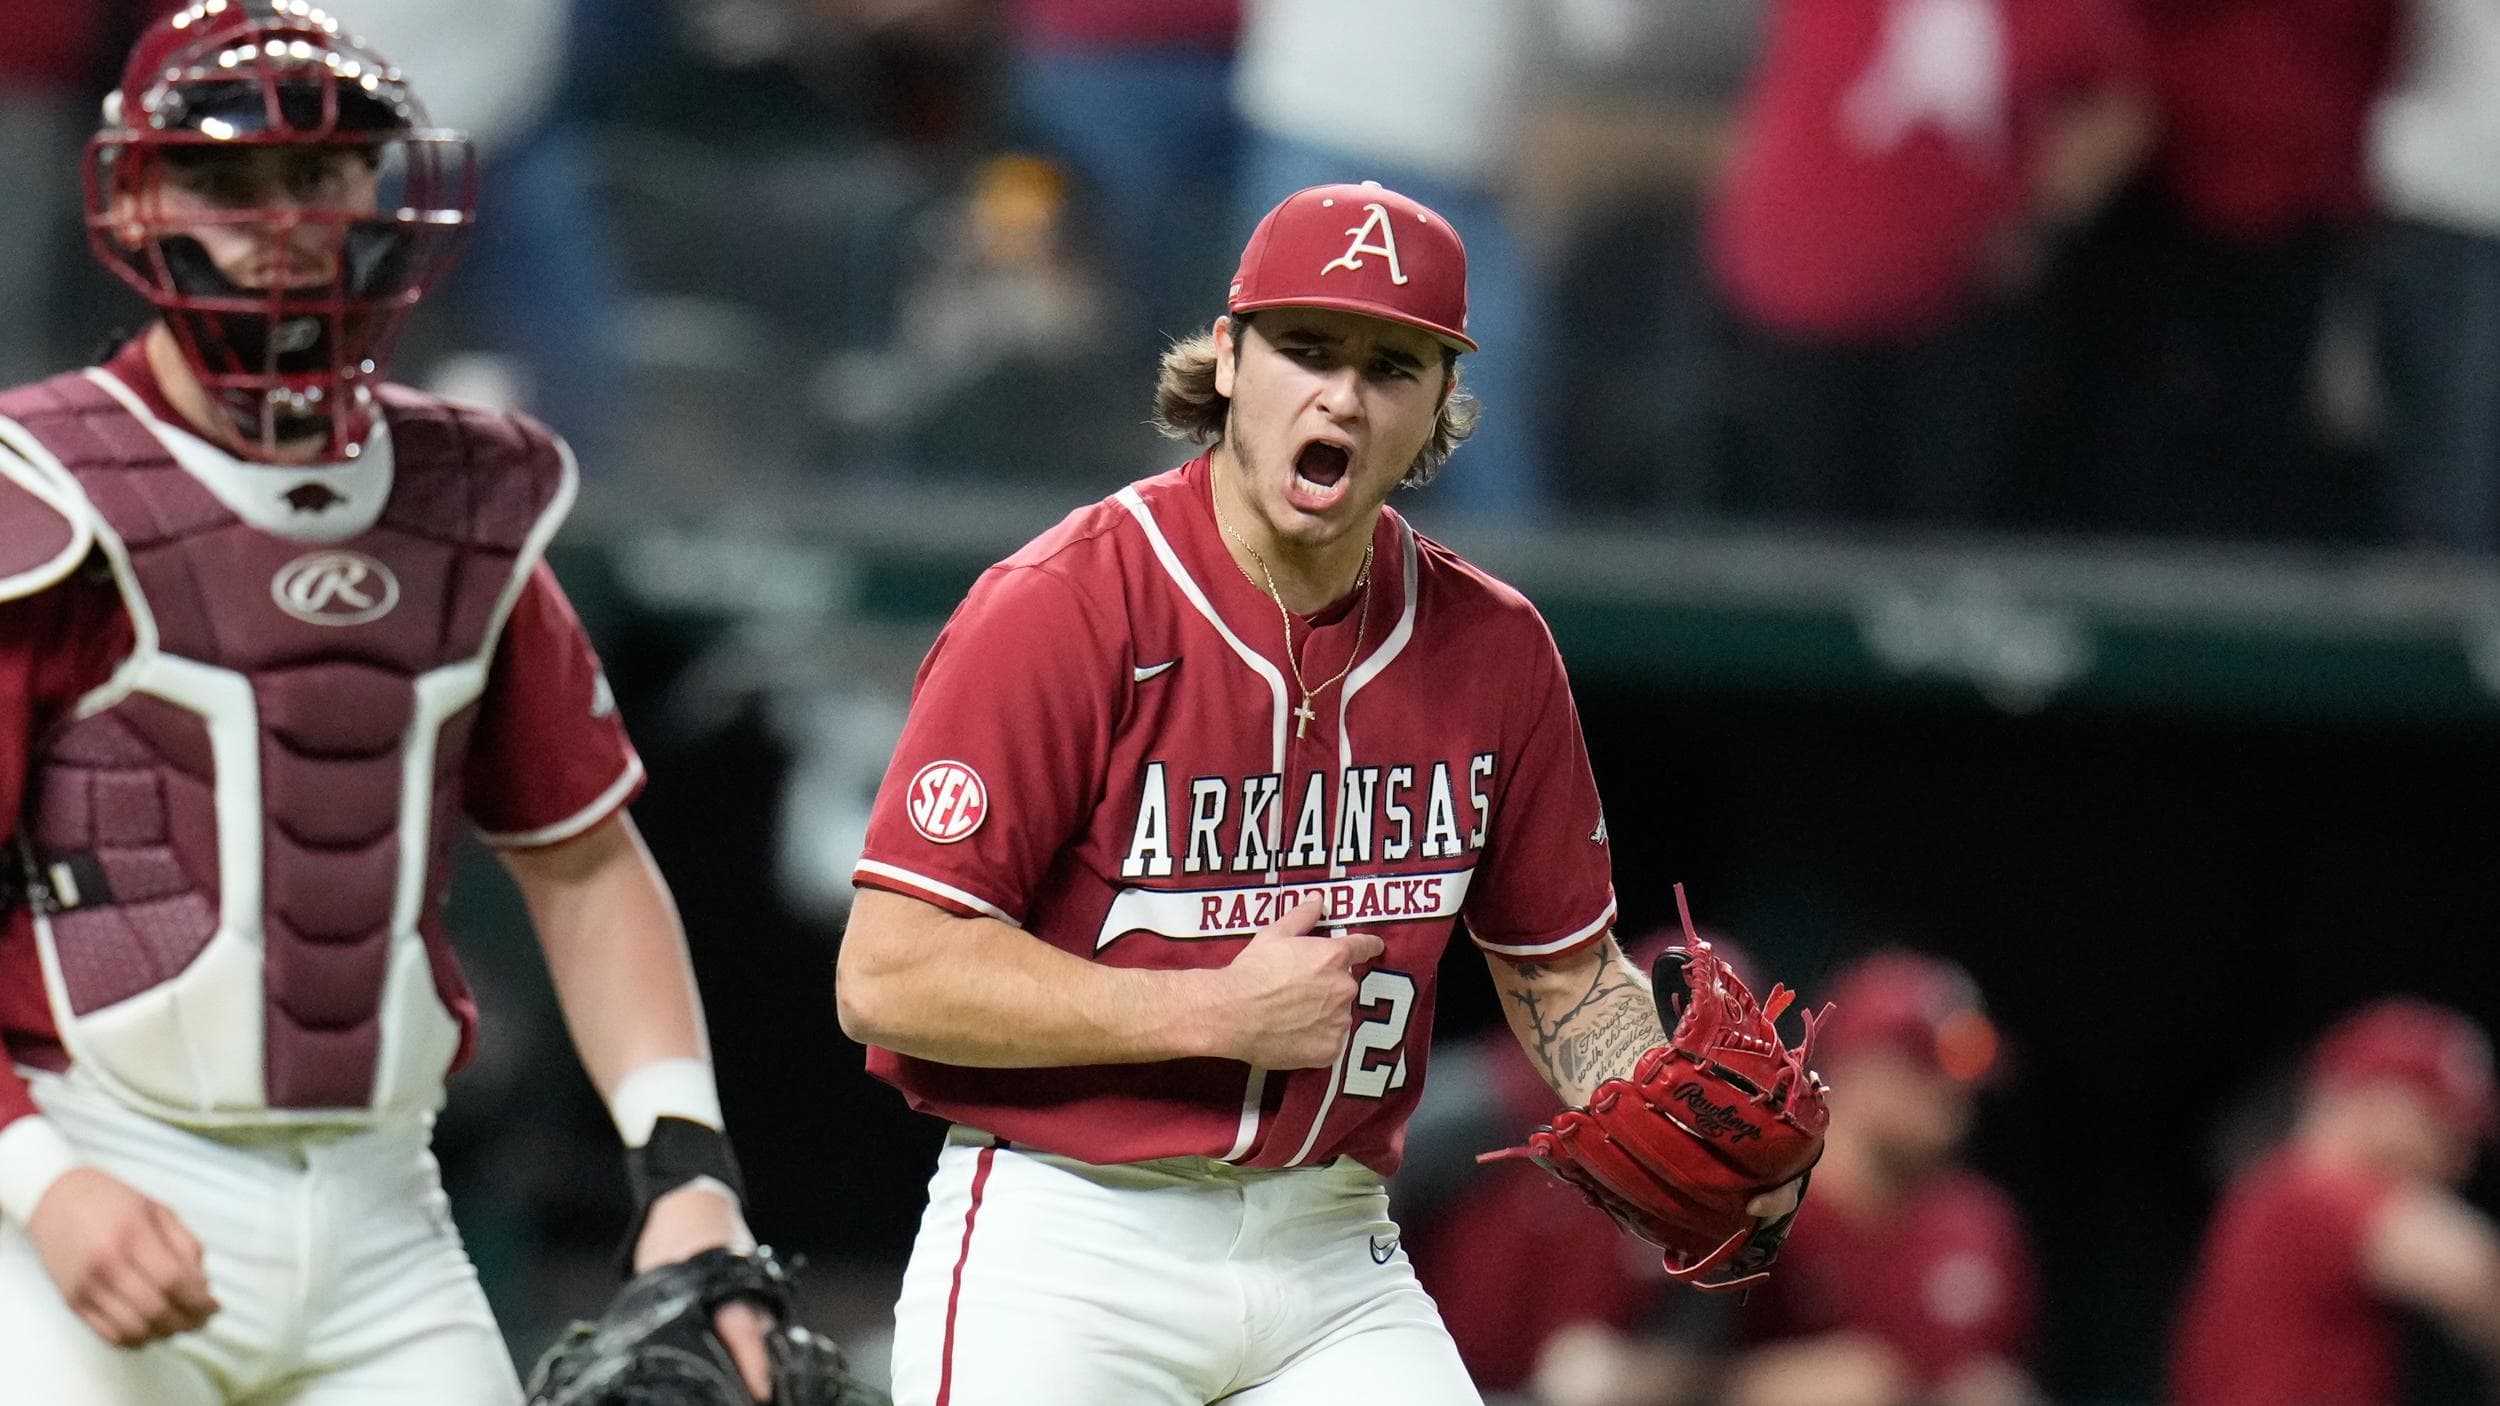 Arkansas pitcher Brady Tygart celebrates the final out of the inning.